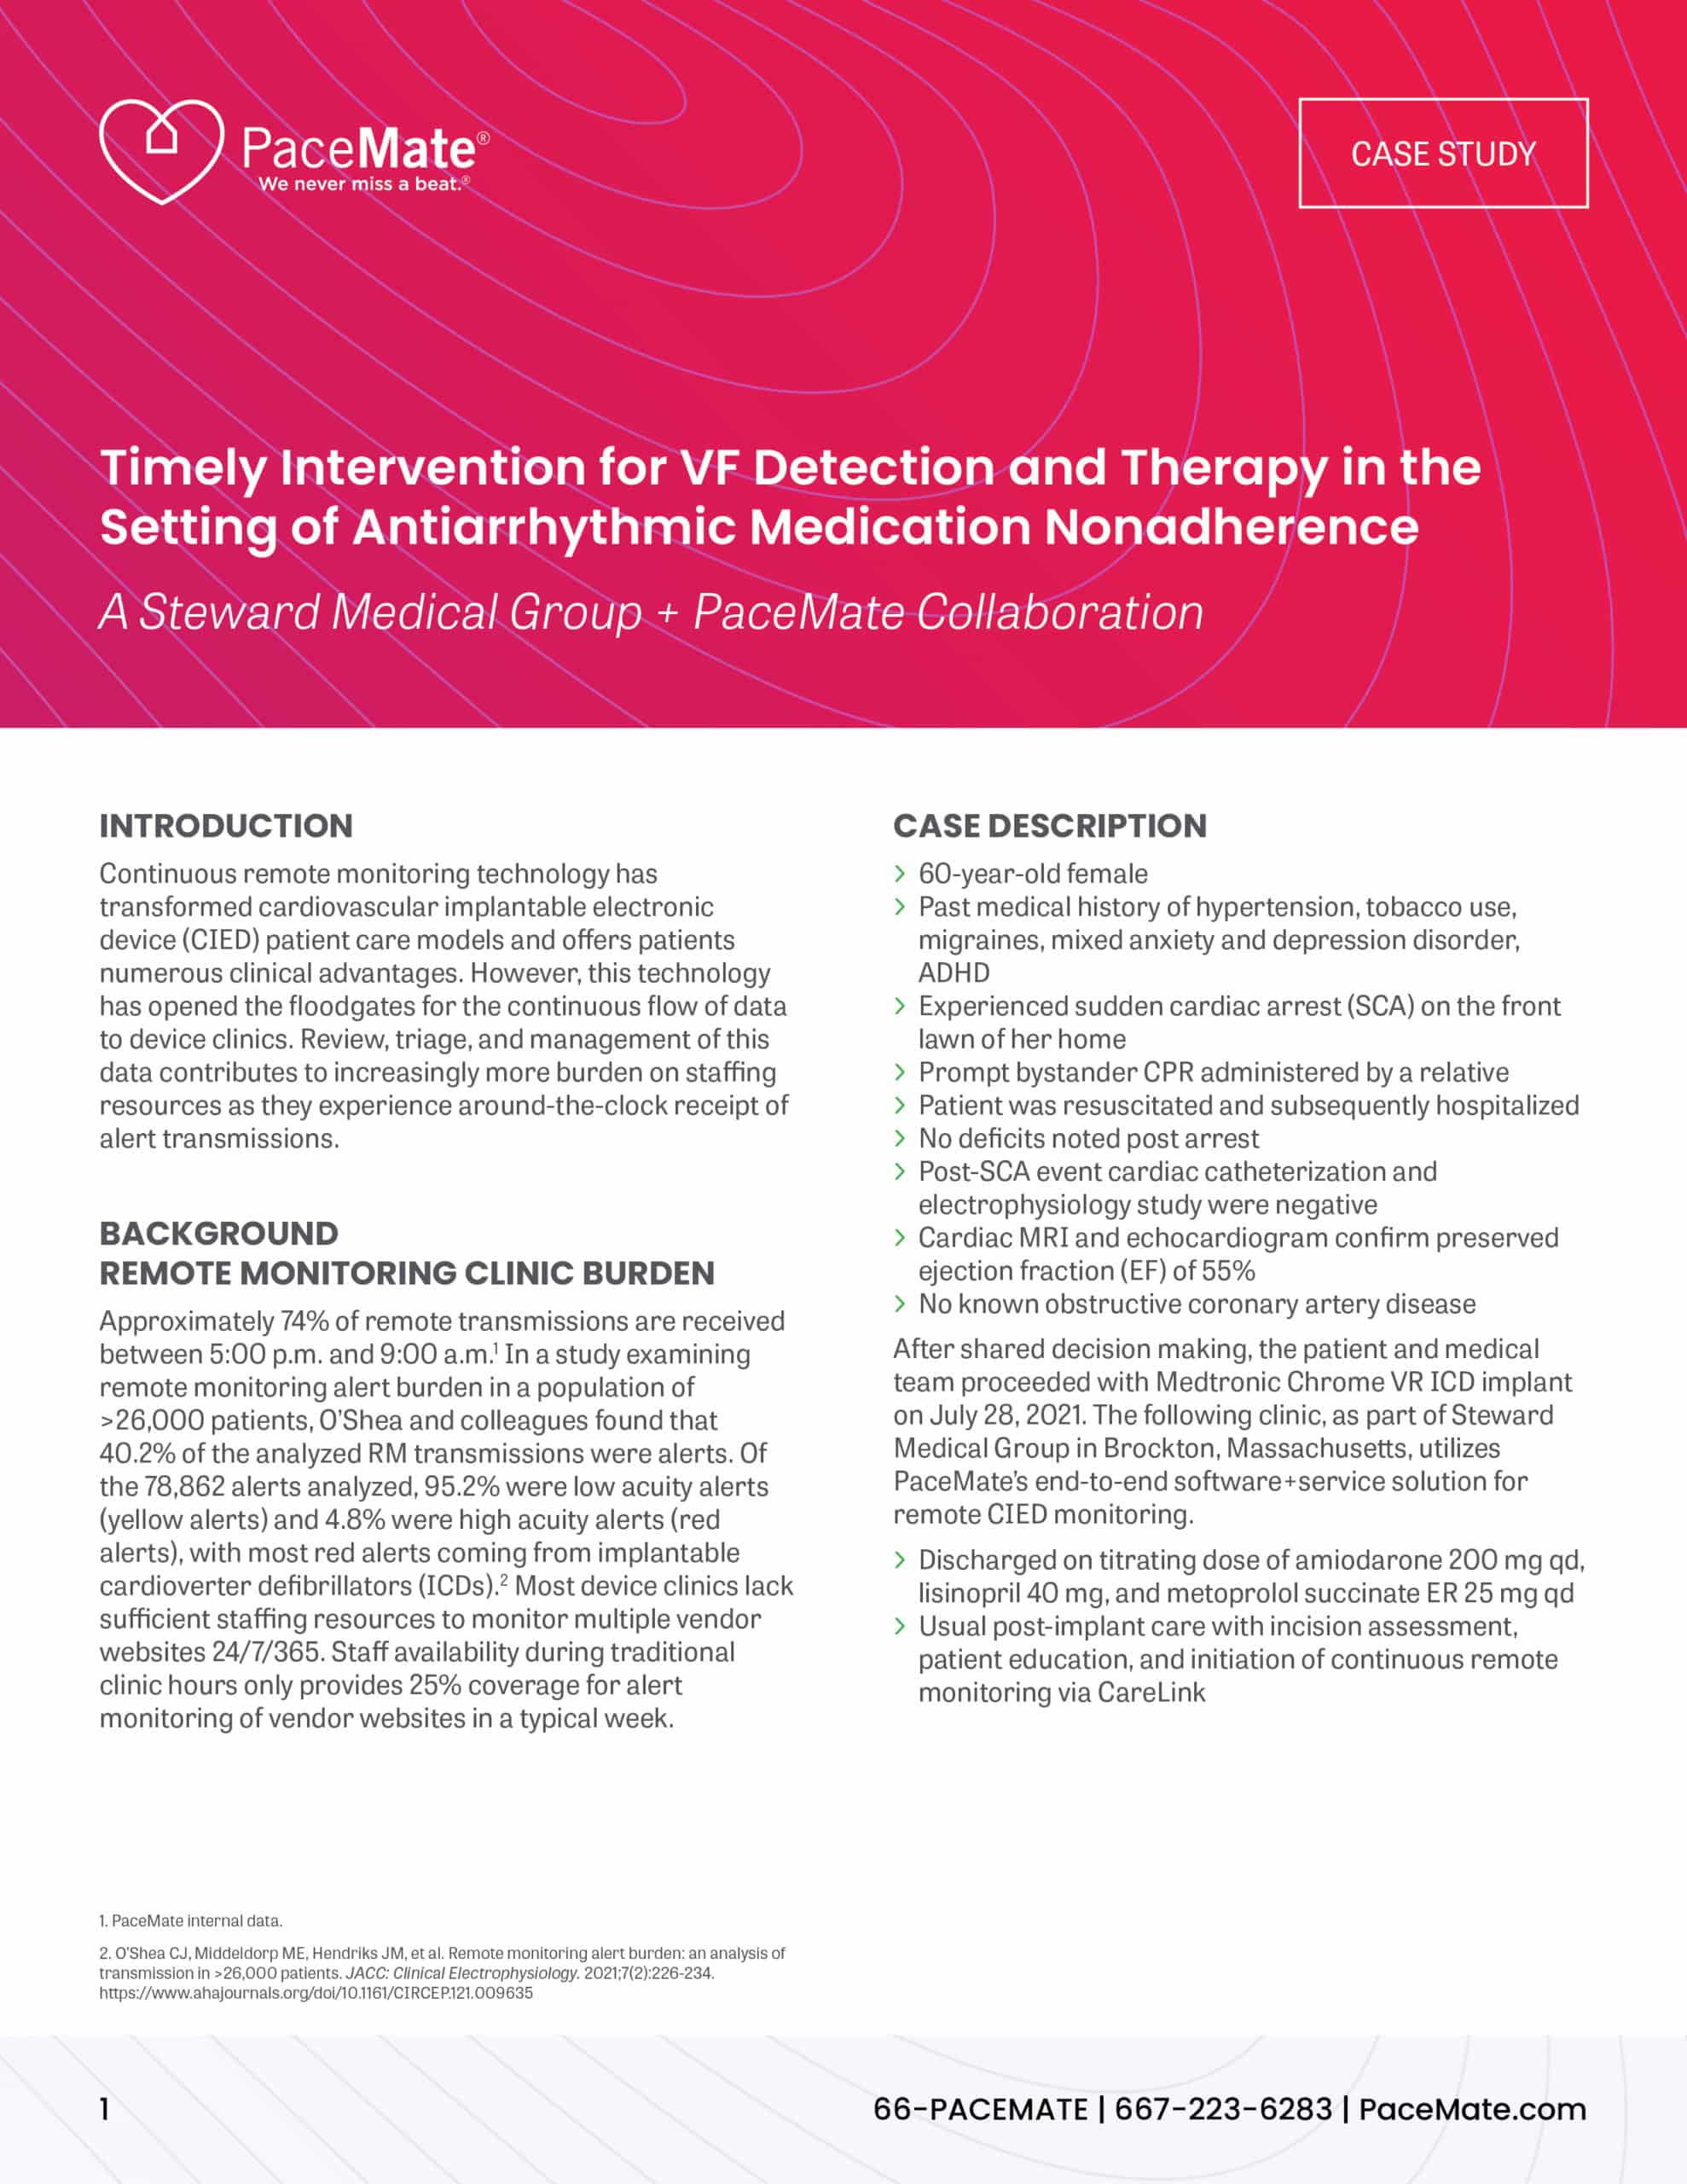 Timely Intervention for VF Detection and Therapy in the Setting of Antiarrhythmic Medication Nonadherence